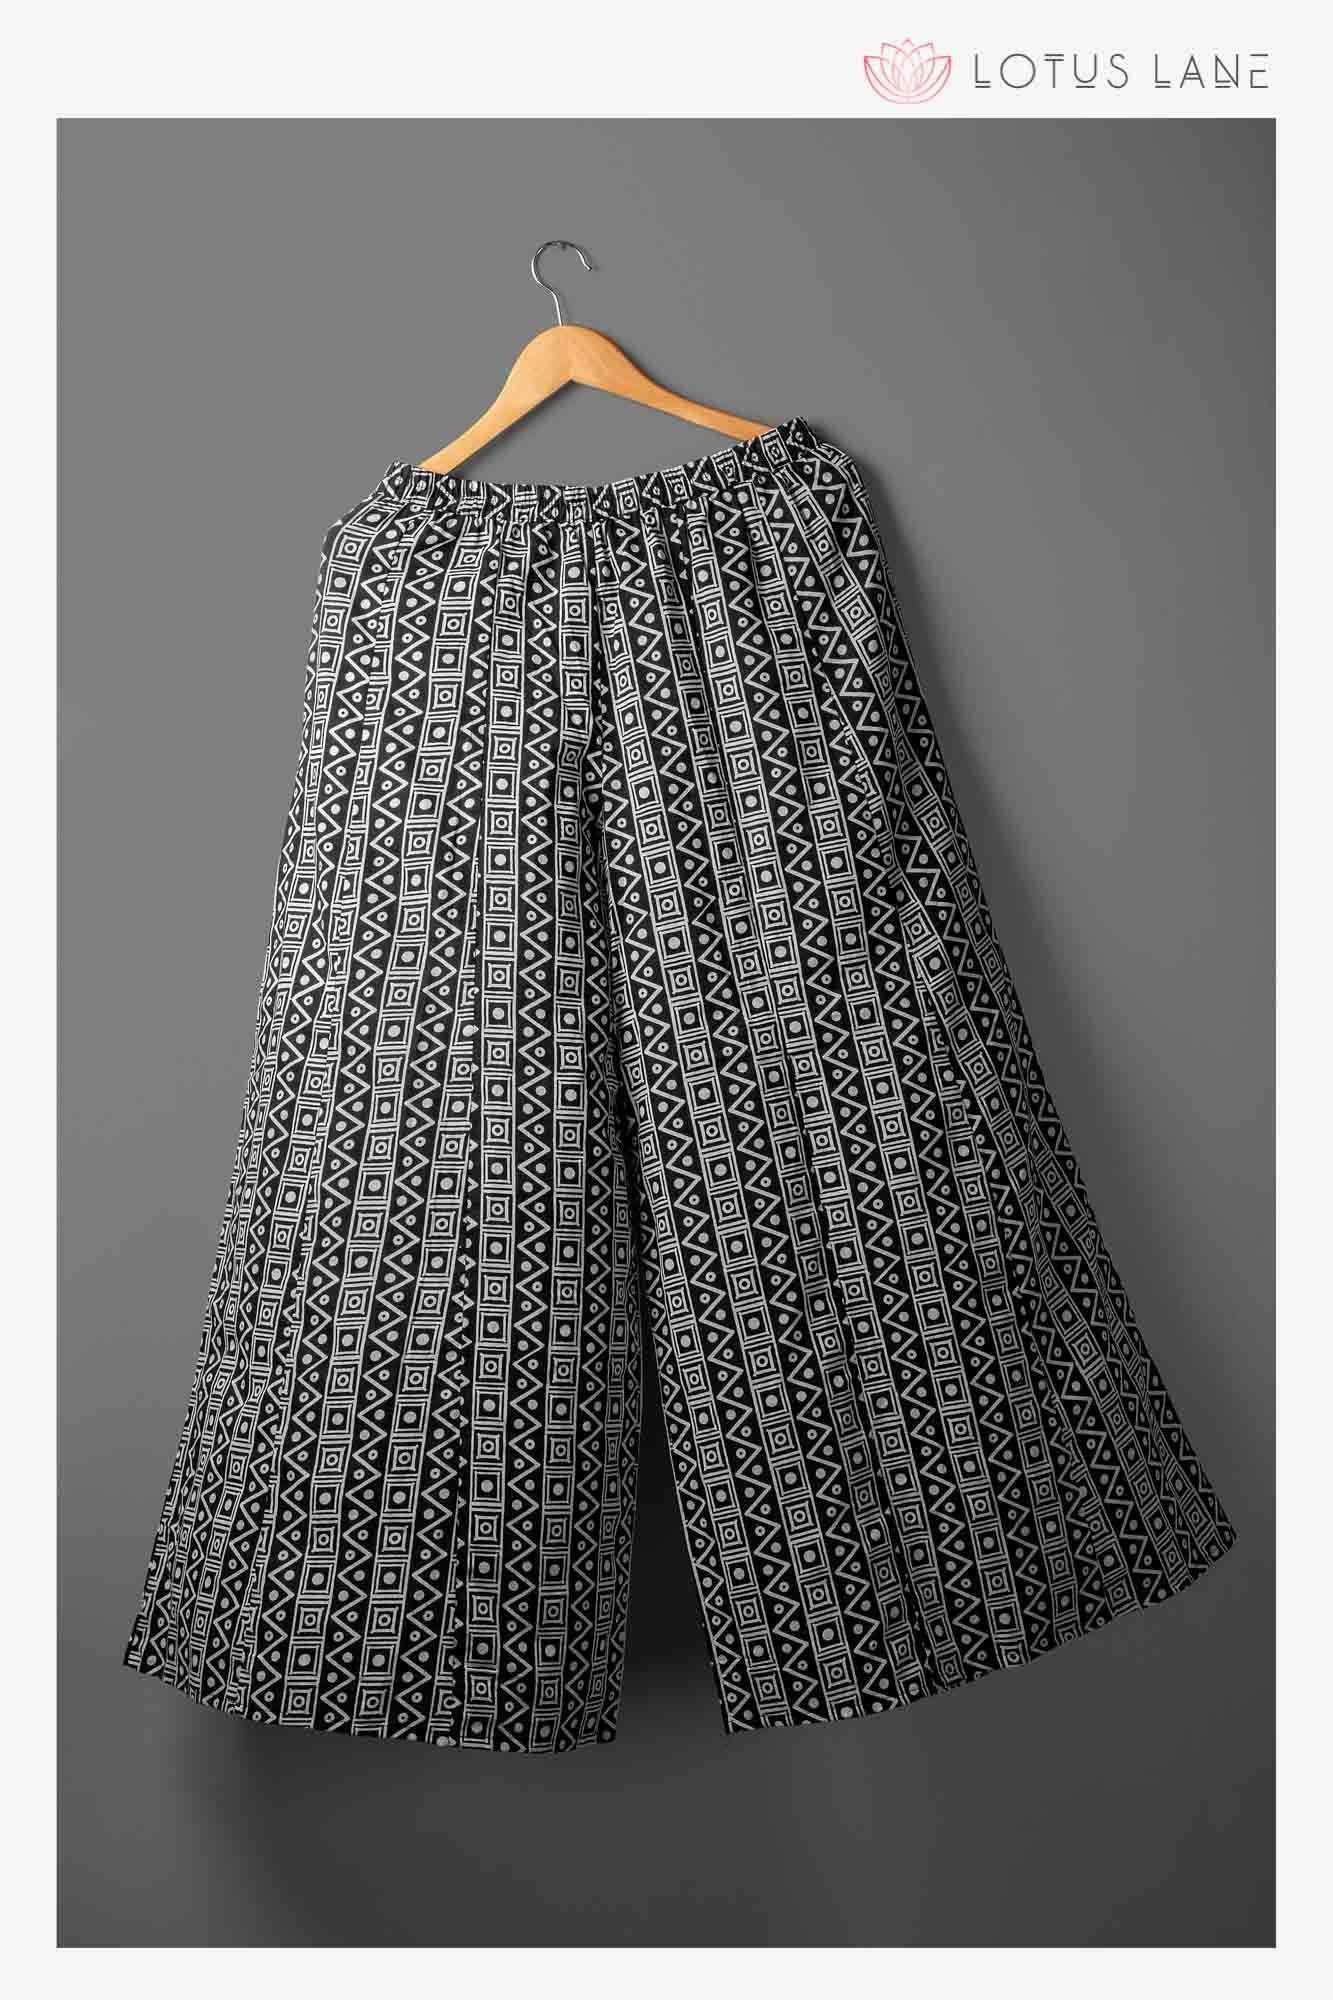 LADIES WOMENS 3/4 LENGTH SHORT PALAZZO TROUSERS CASUAL WIDE LEG CULOTTES  PANTS | eBay